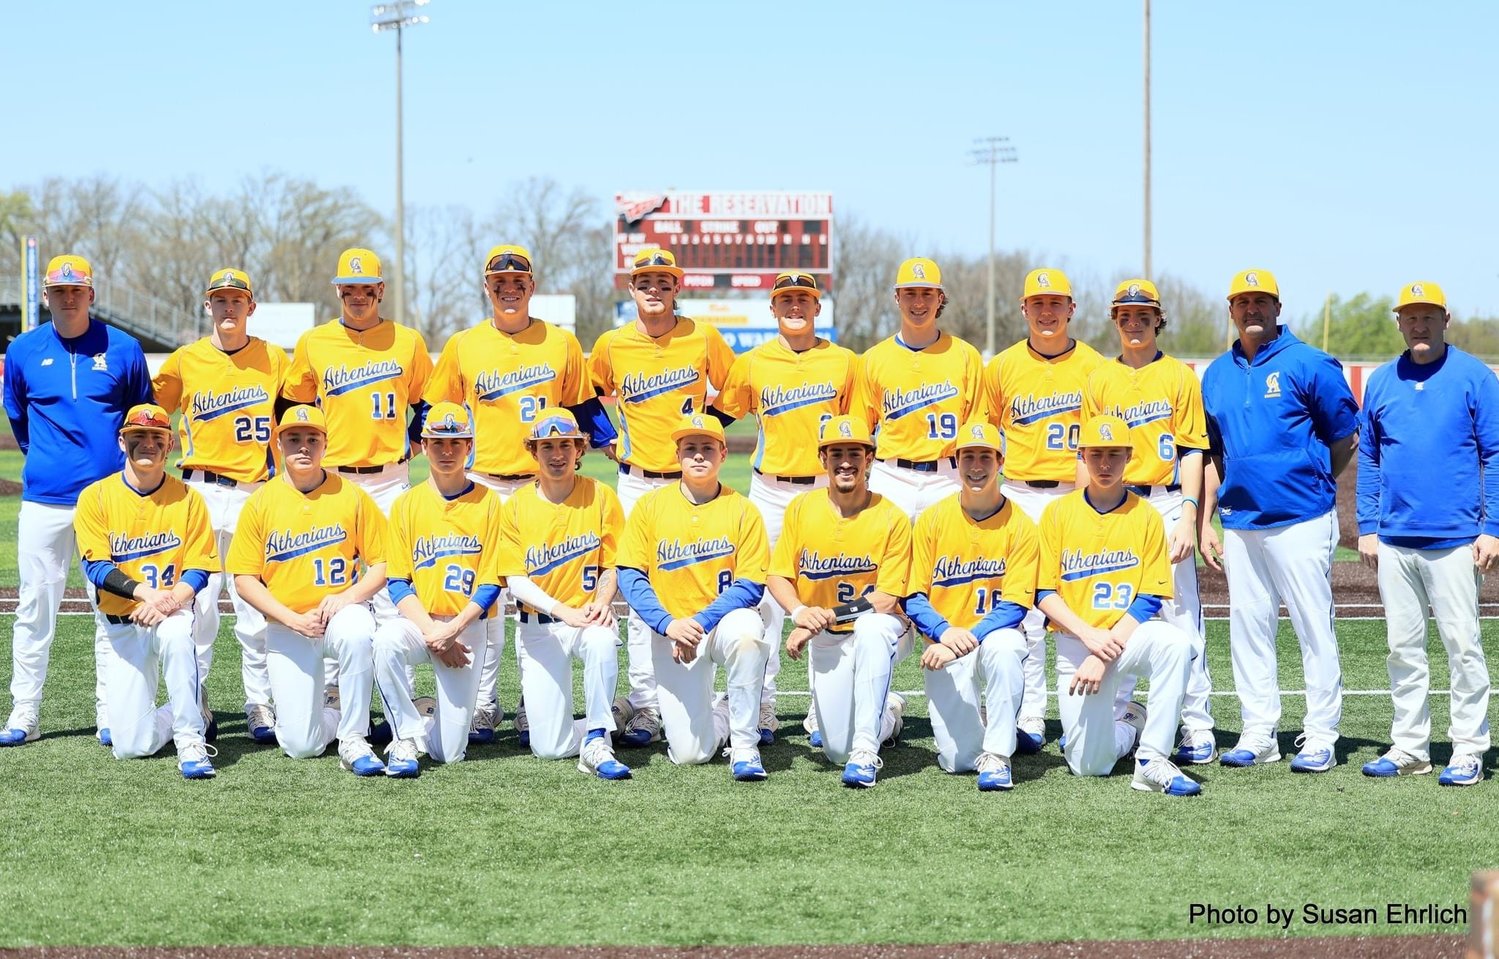 Crawfordsville baseball will look to avenge their 2 regular season losses to Tri-West when the two teams square off on Wednesday at CHS in the sectional opener.